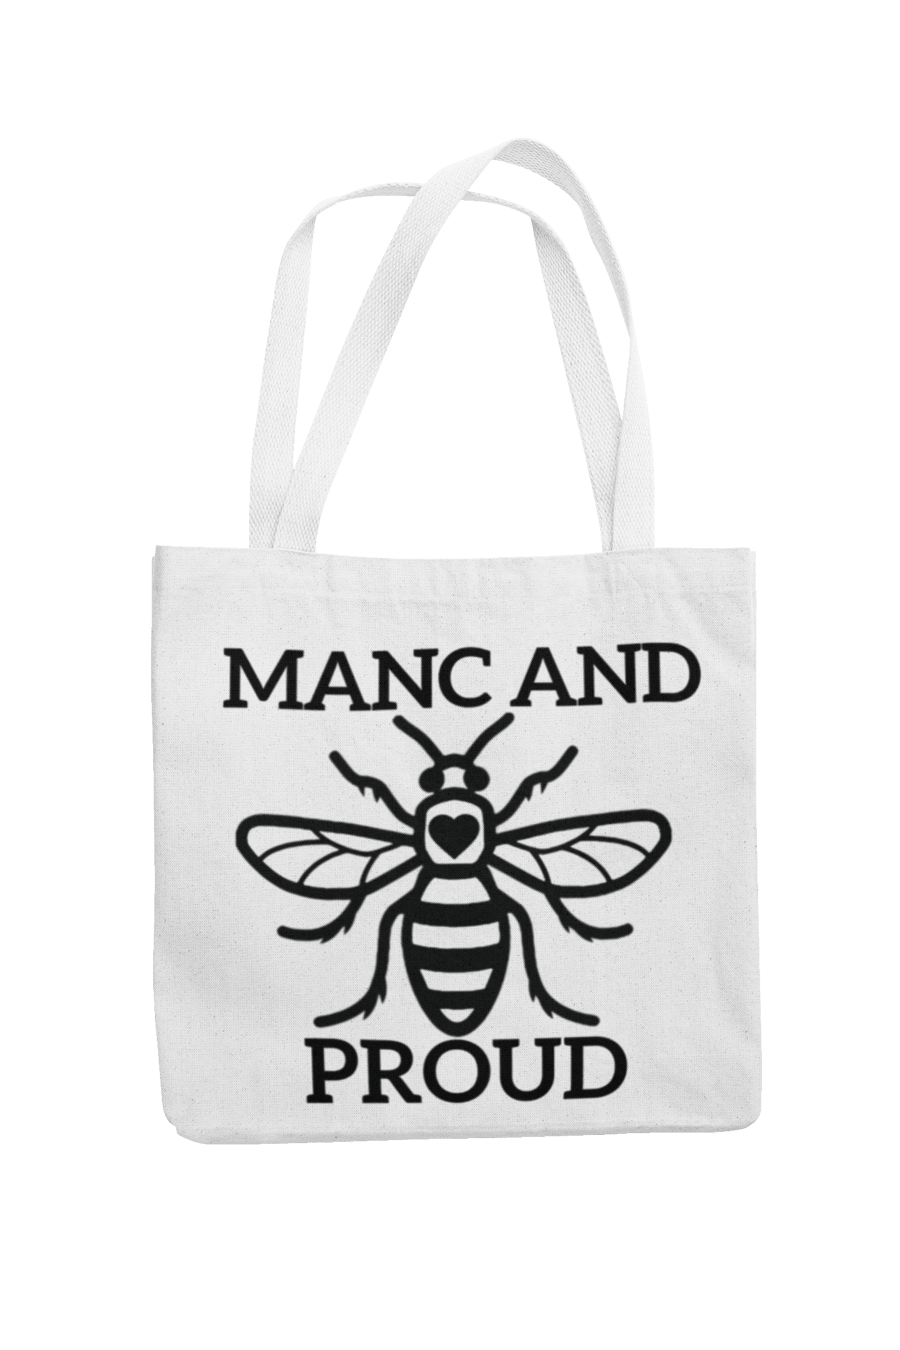 Manchester Bee Tote Bag - Manc And Proud